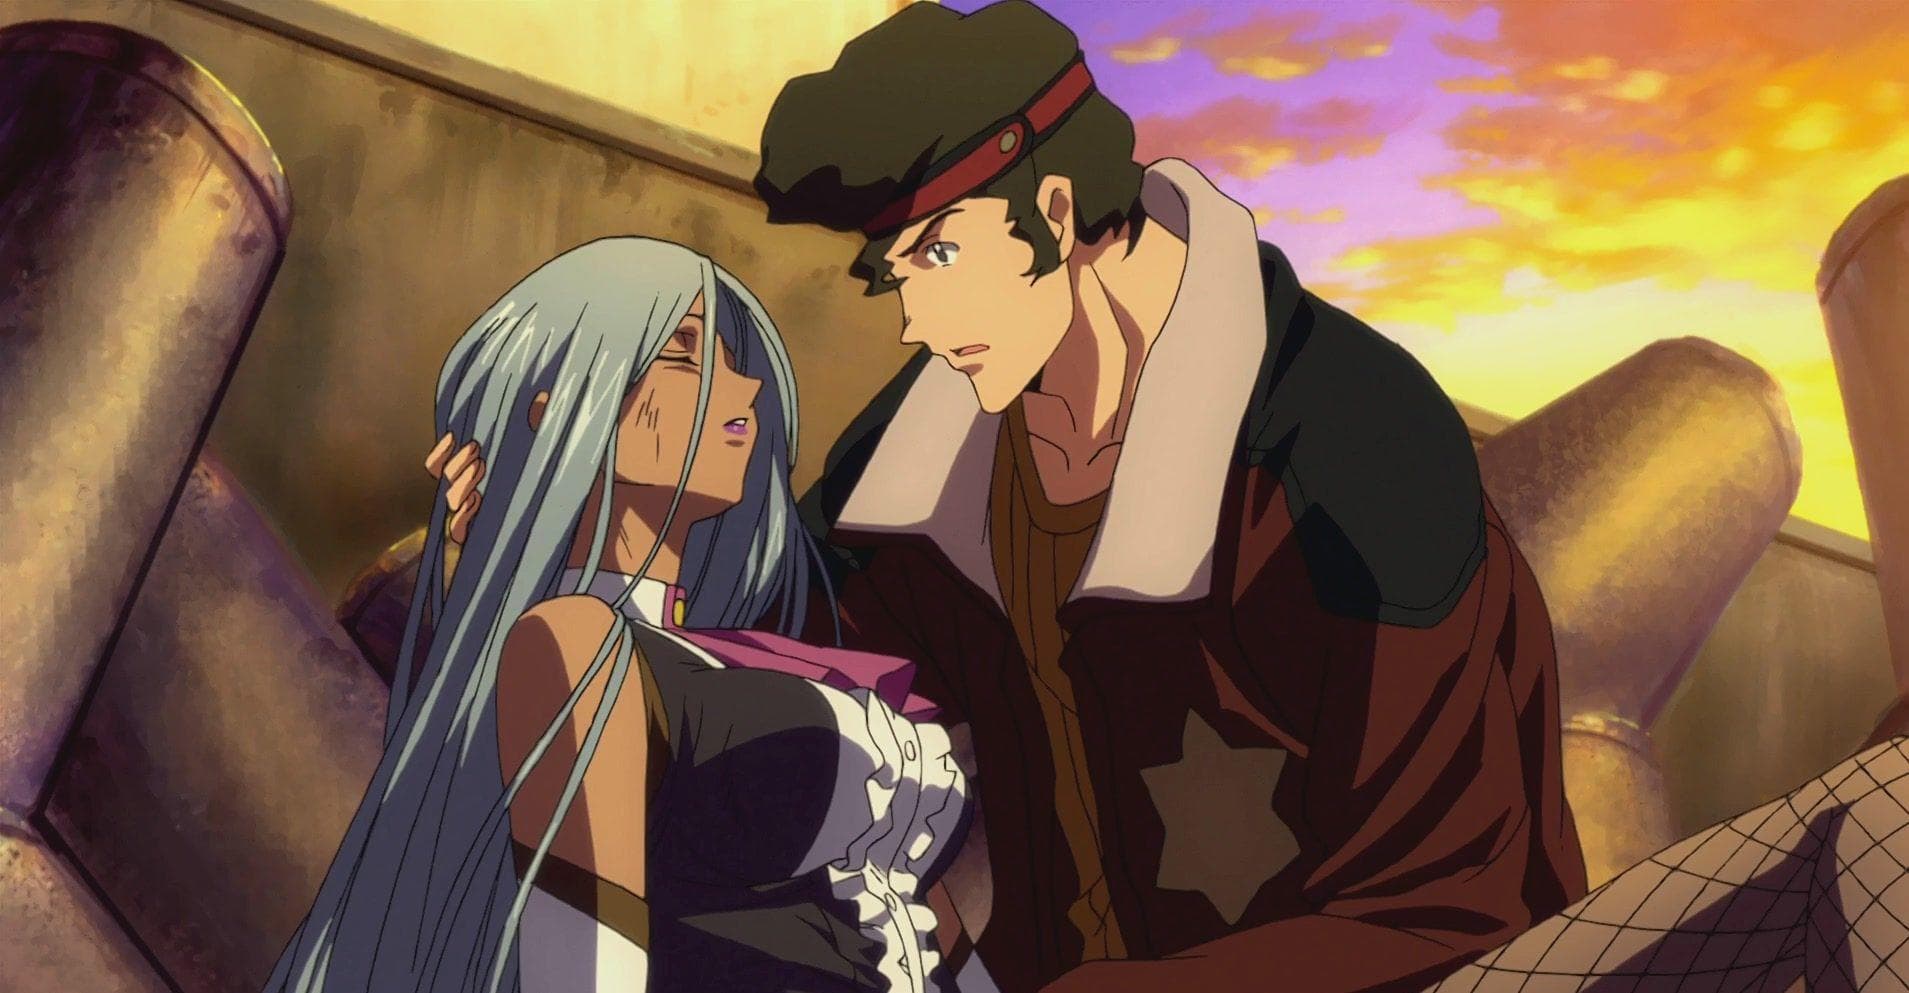 The 15 Best Romance Anime Dubs That Sound Good In English